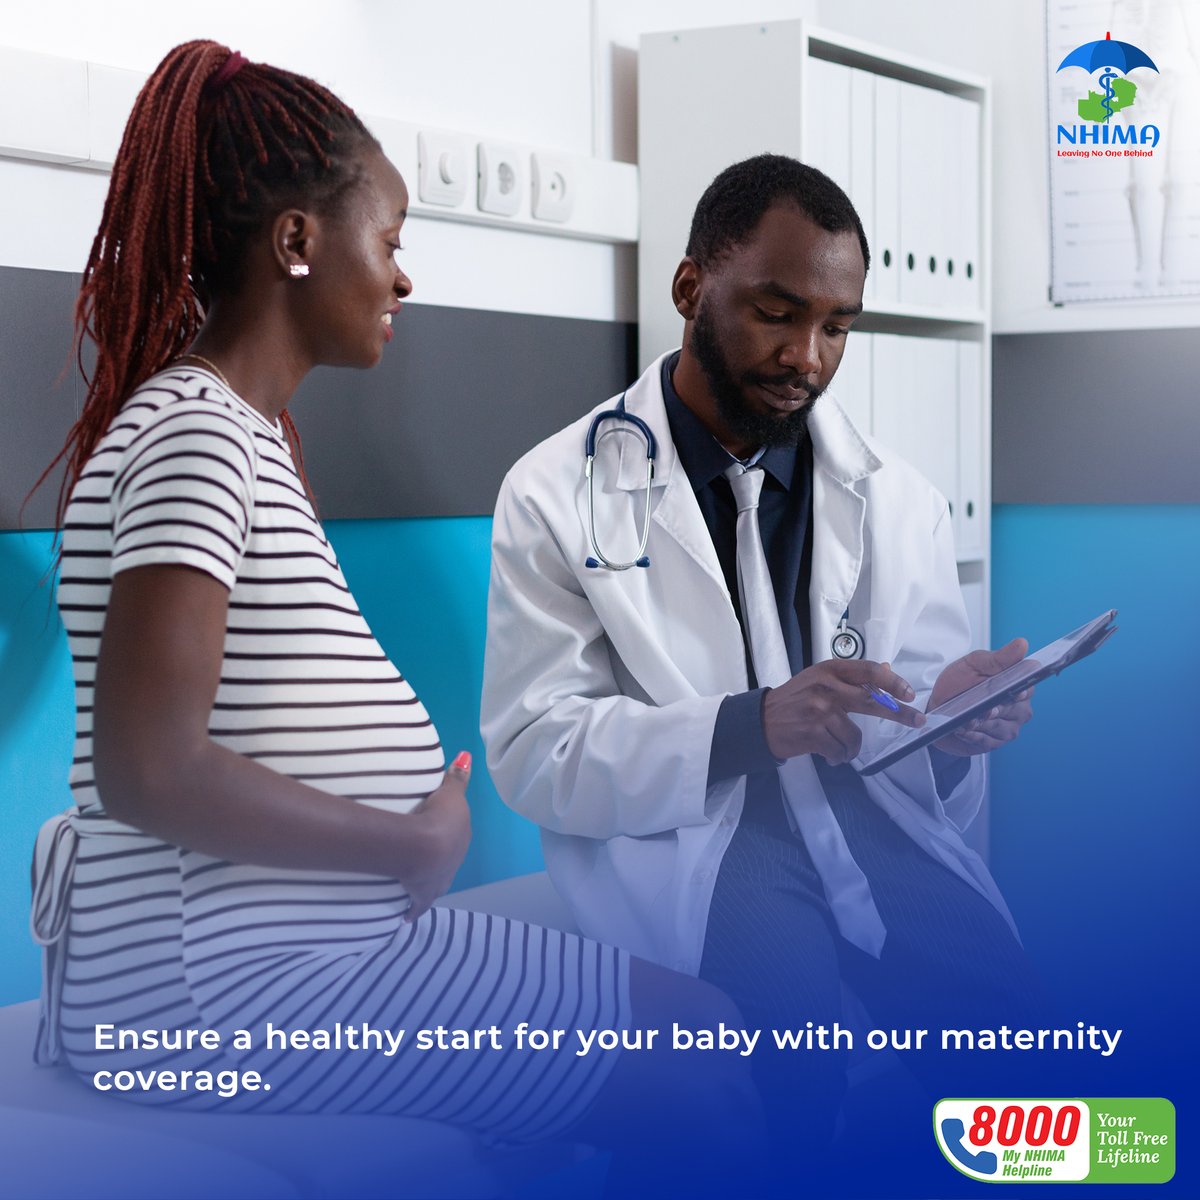 Maternal, New-Born and Pediatric Services. The benefit package pays for cost of deliveries both normal and caesarean, obstetric and gynecological interventions, Newborn and pediatric services as listed in the package. nhima.co.zm/membership/ben… #LeavingNoOneBehind